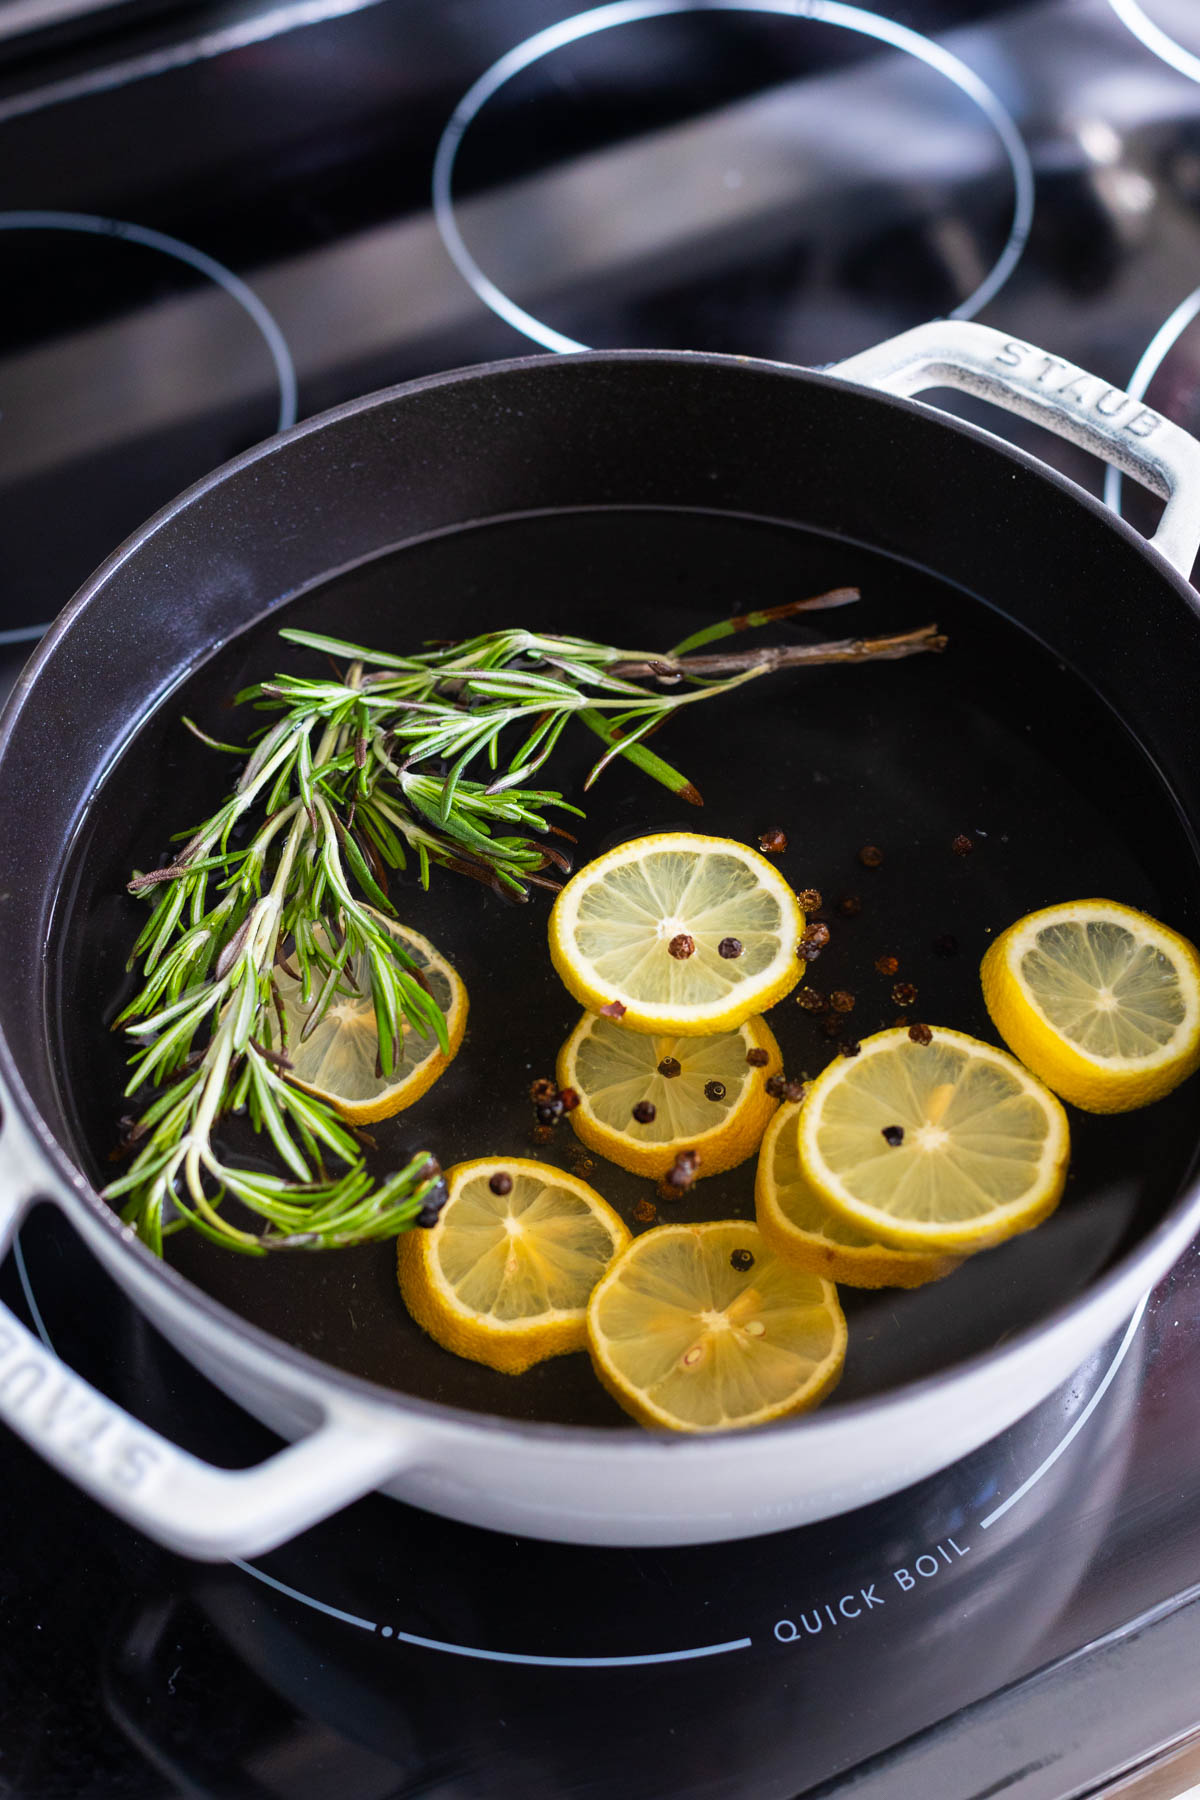 The simmer pot on the stove has lemon slices and fresh rosemary.